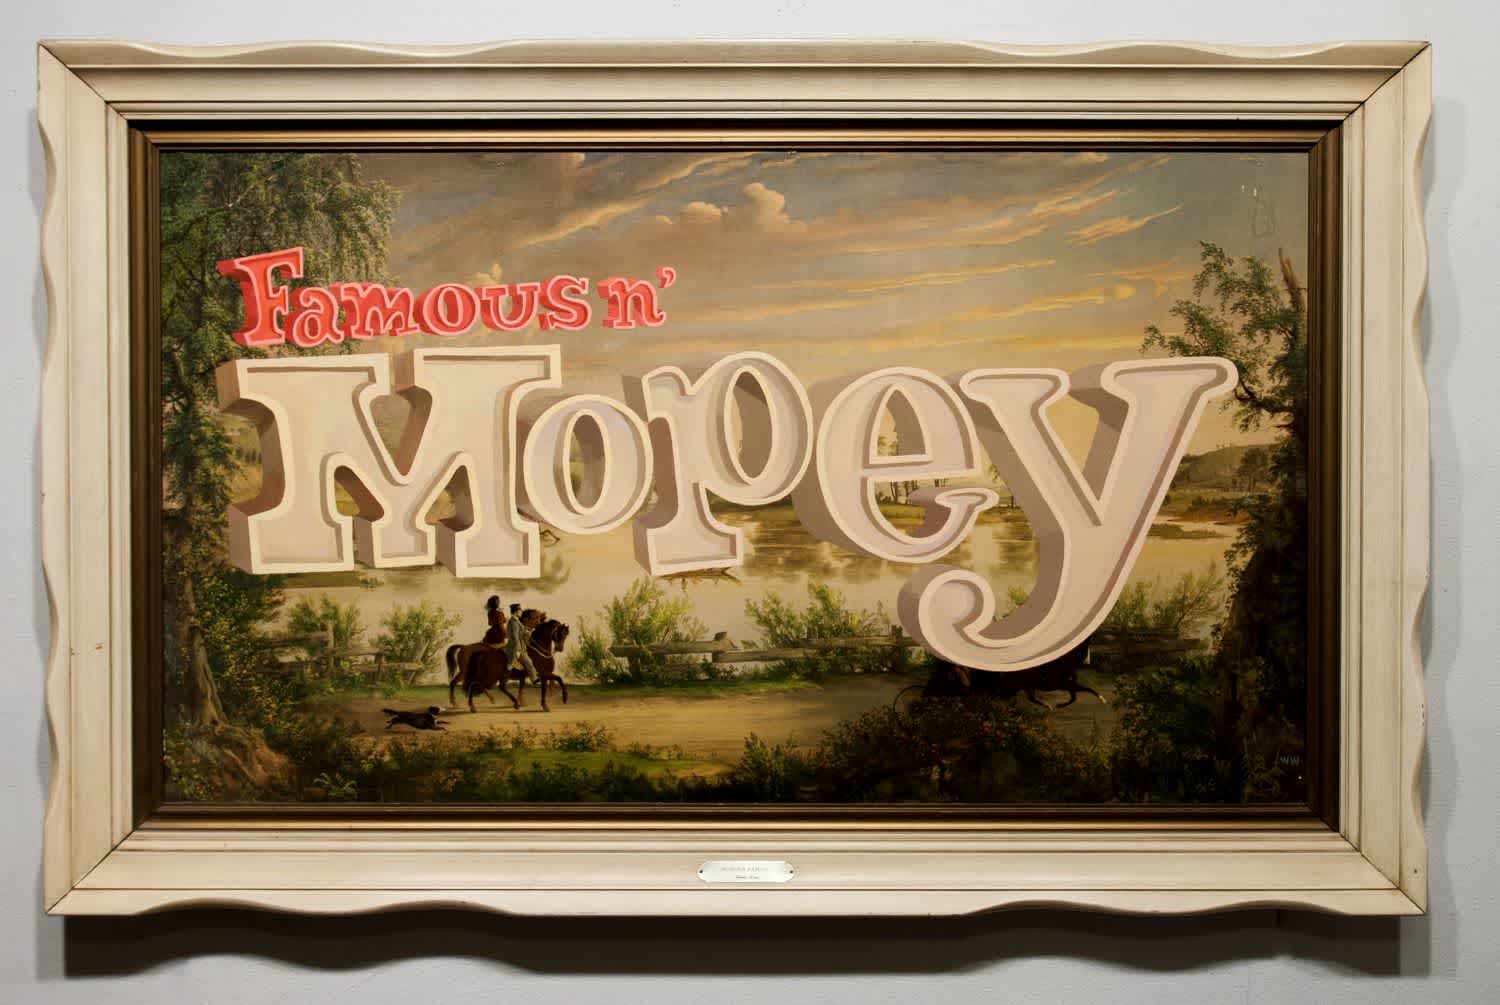 Artist Wayne White and his piece Famous N Mopey featured in the 2016 exhibition Turn the Page: The First Ten Year of Hi-Fructose at the Virginia Museum of Contemporary Art. 